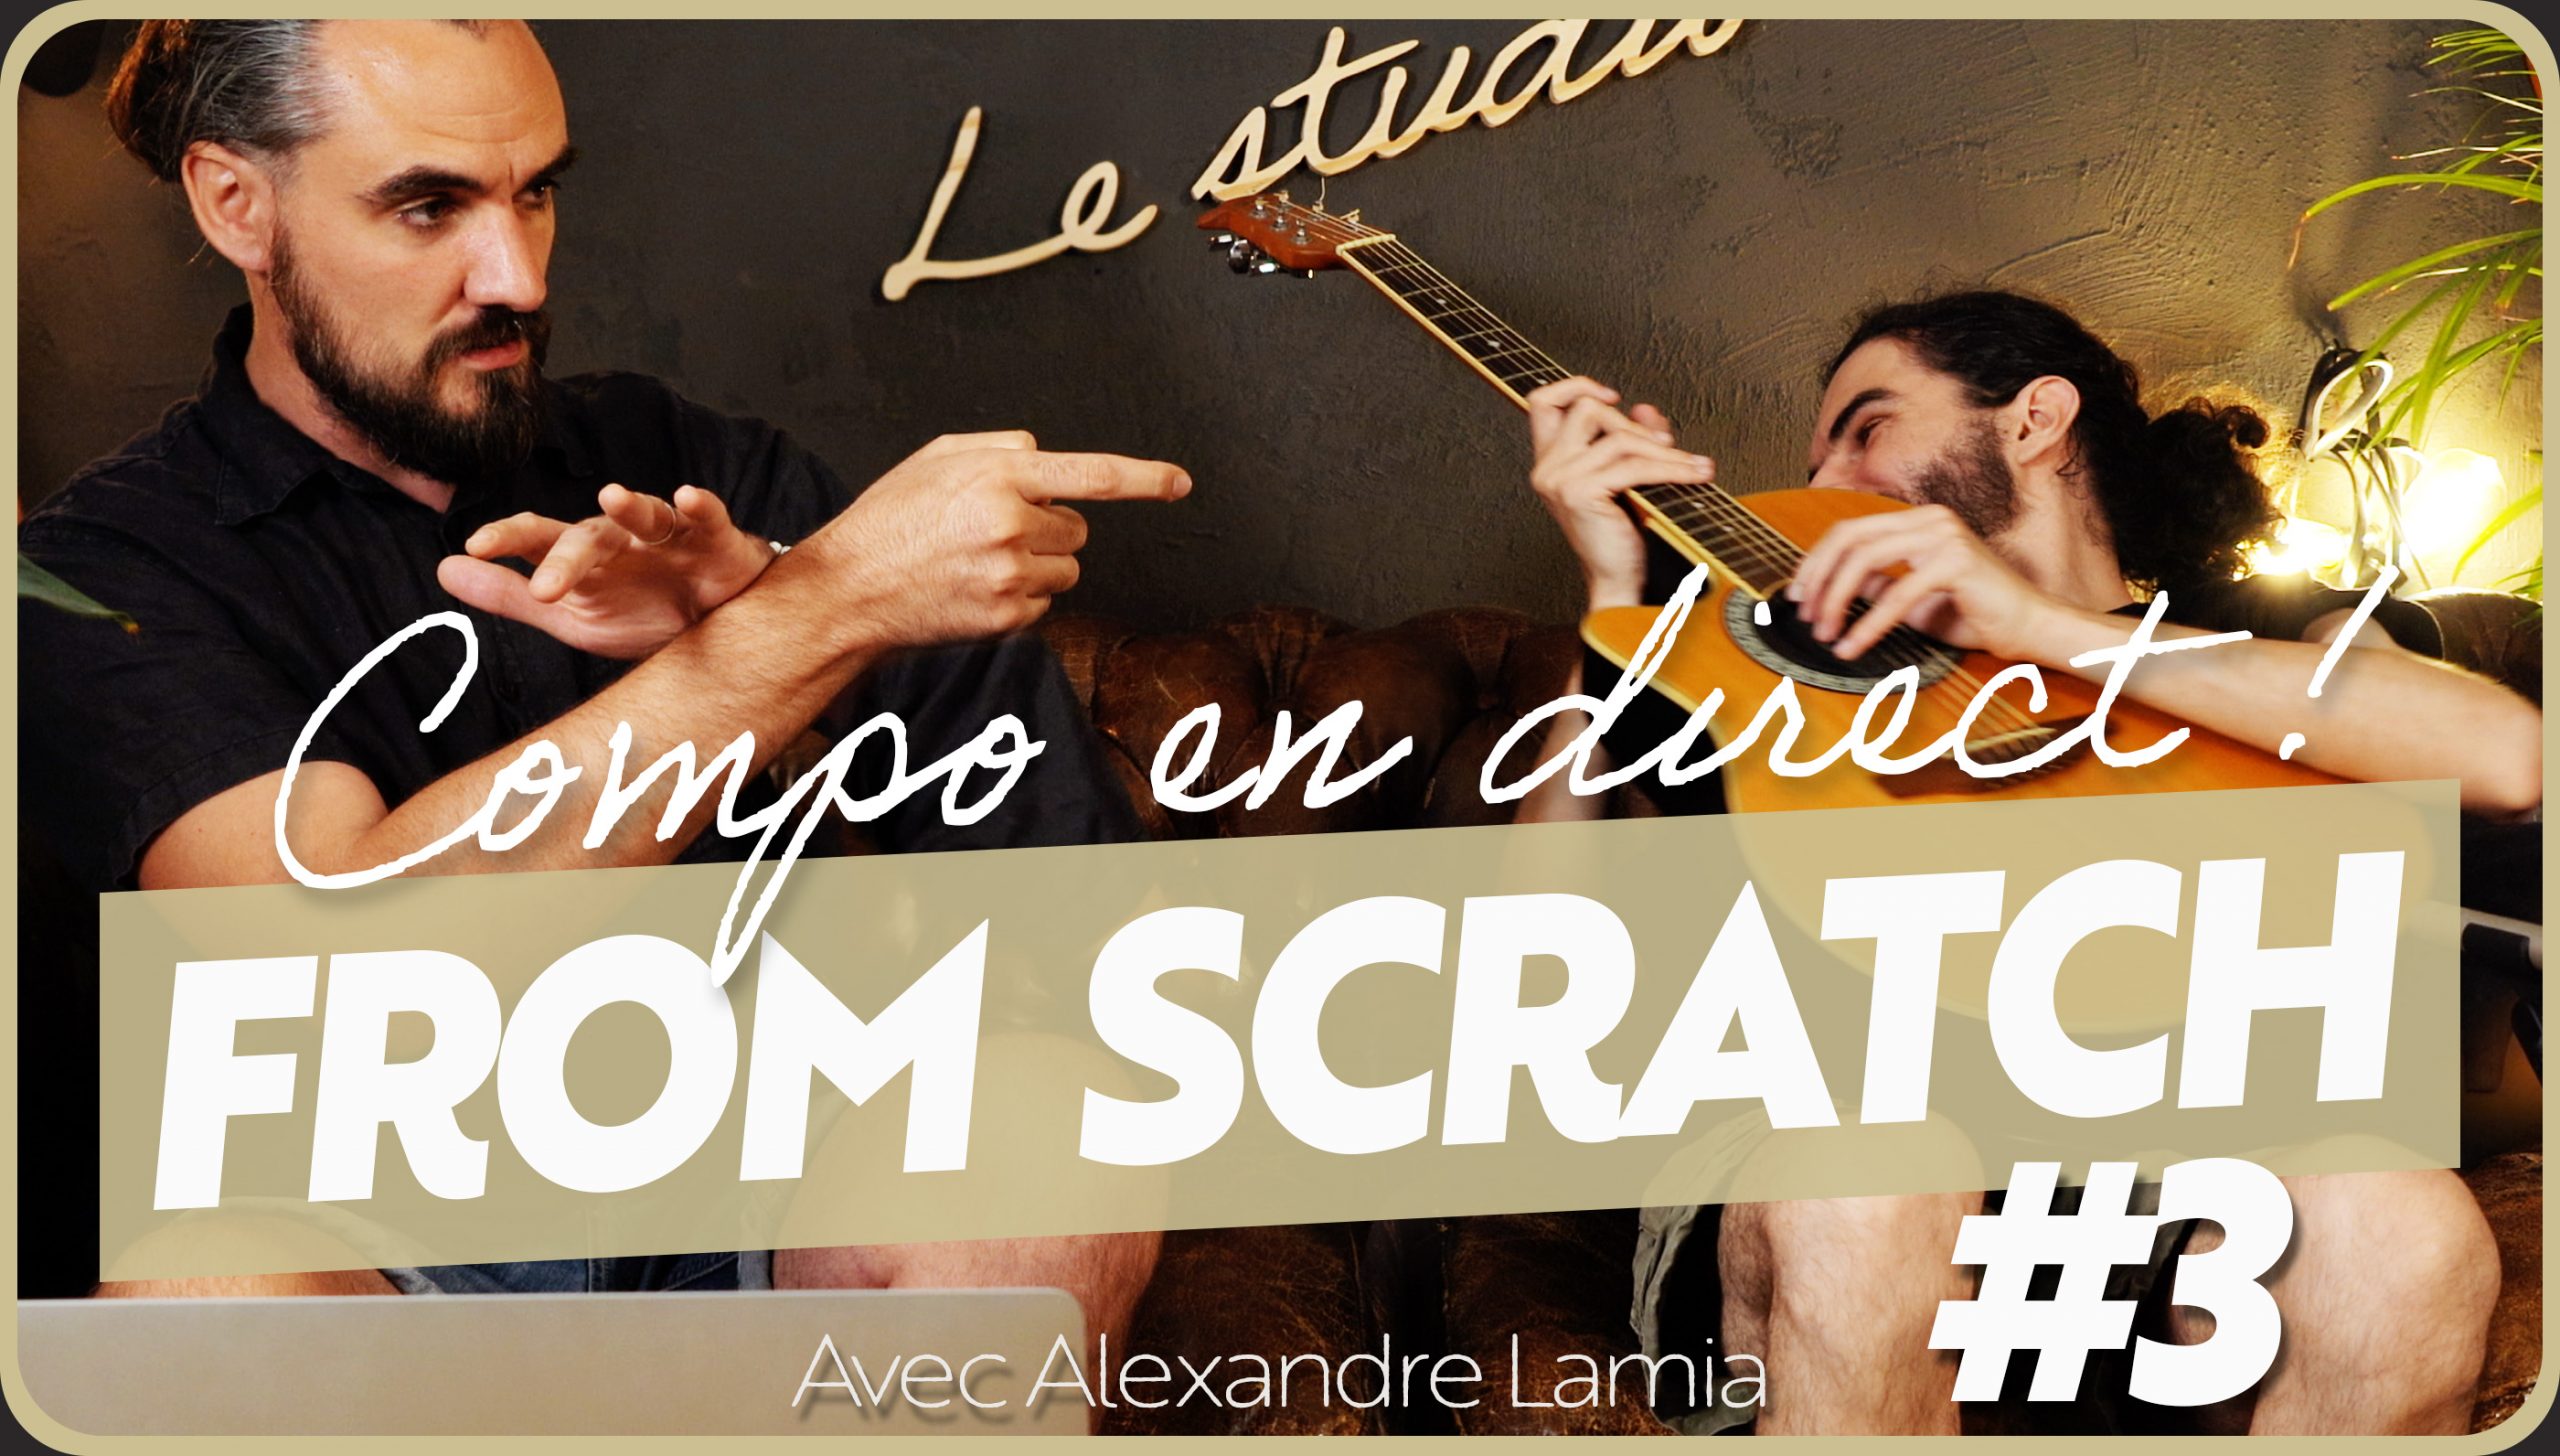 From Scratch #3, il compose en direct